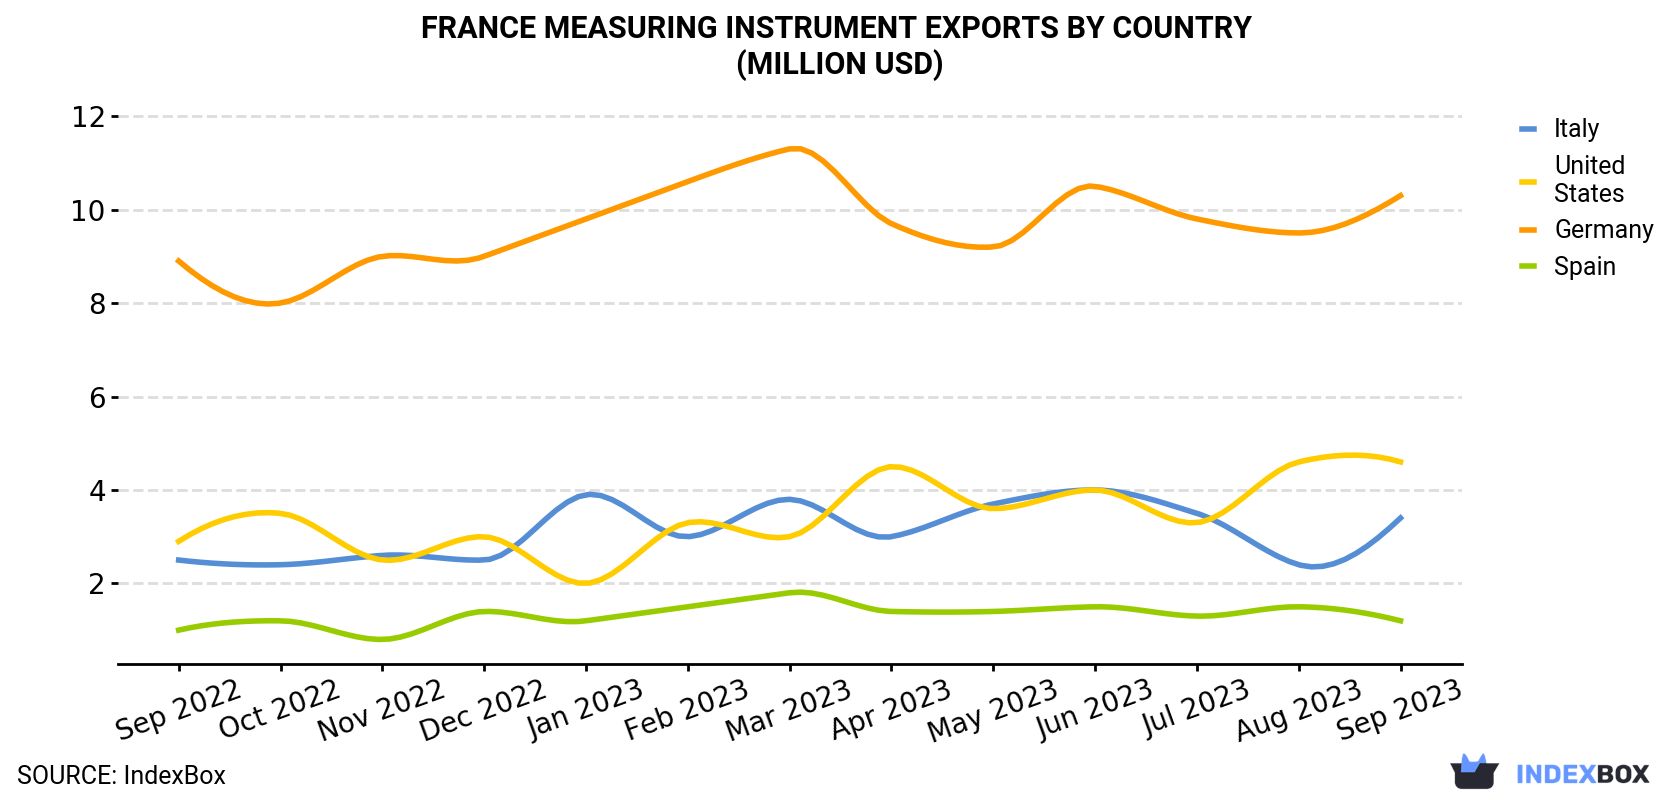 France Measuring Instrument Exports By Country (Million USD)